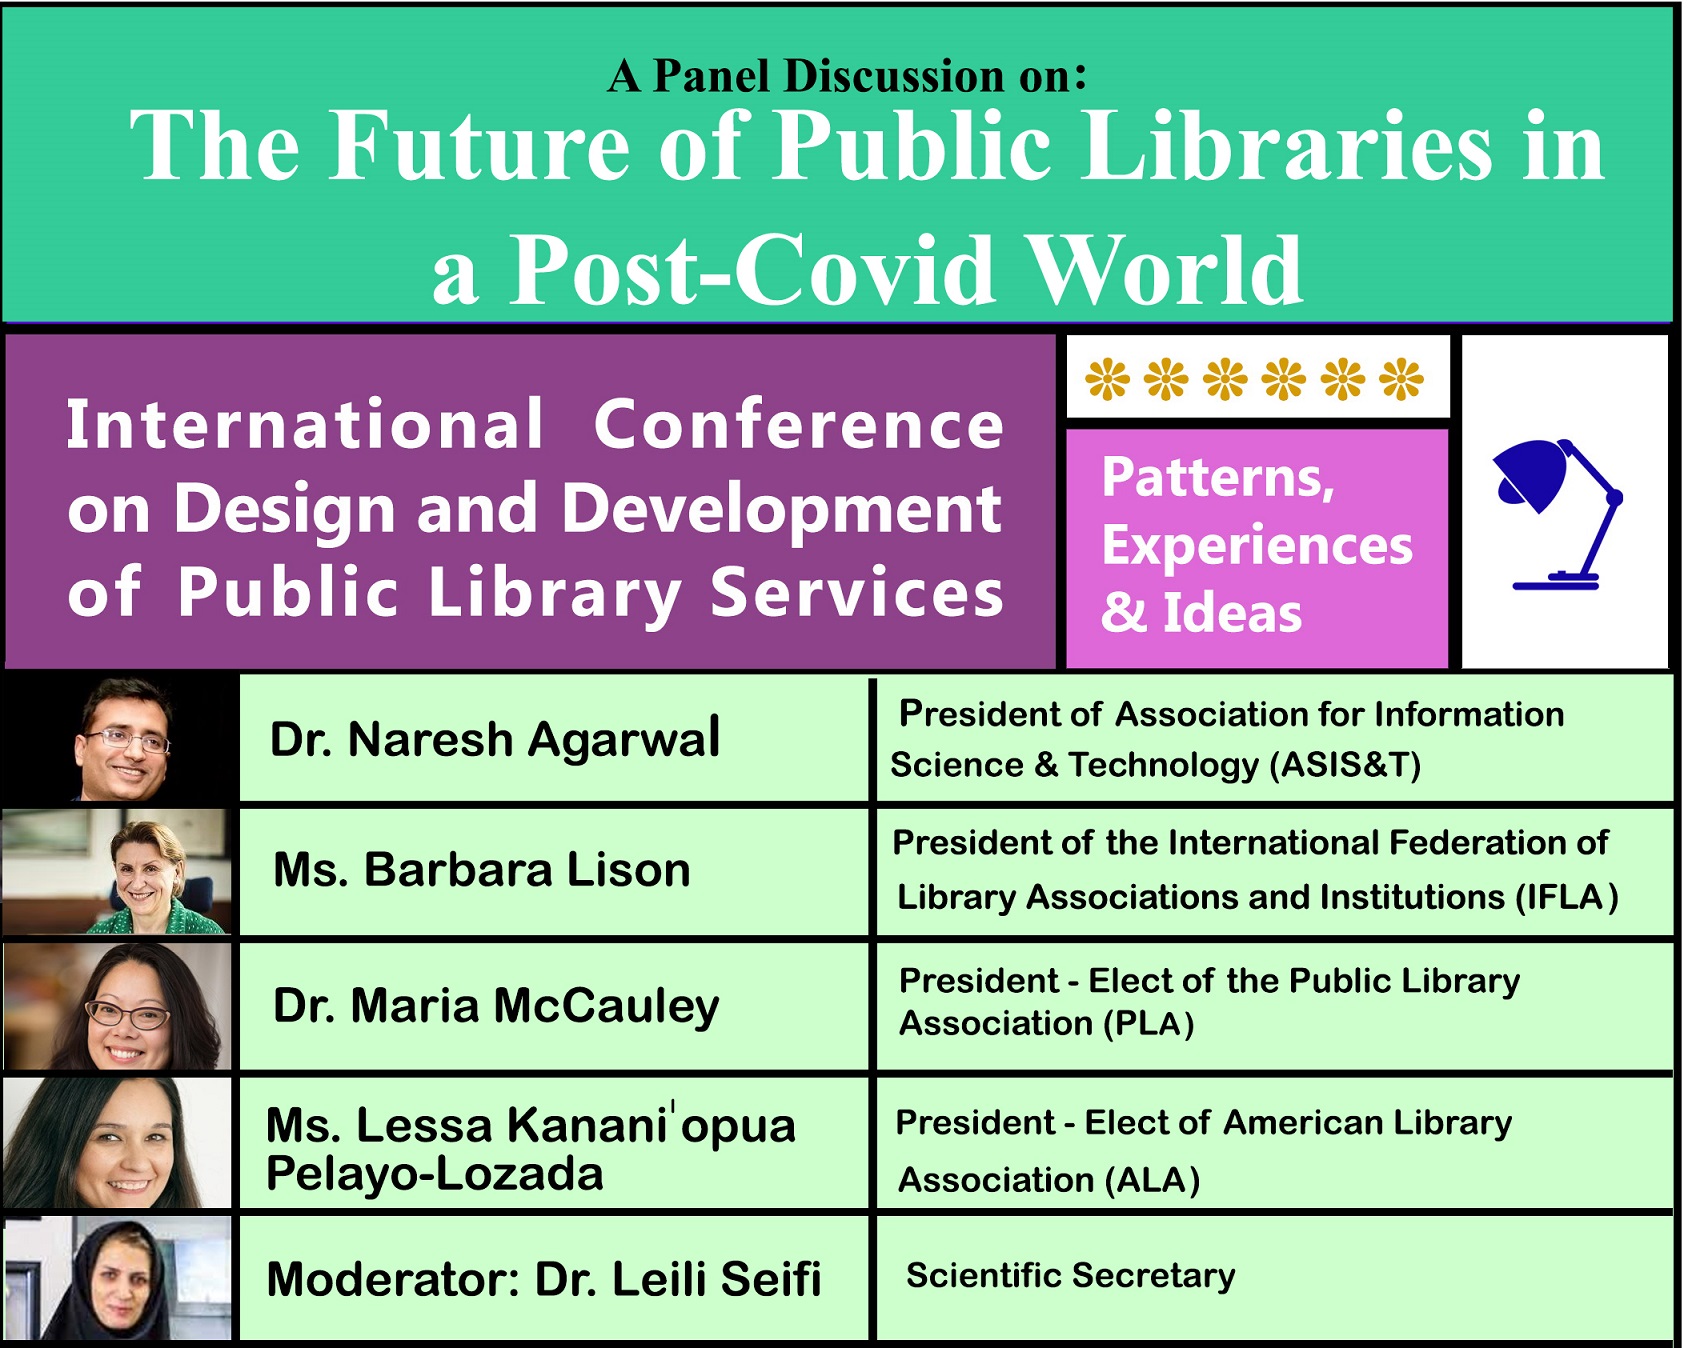 A Panel Discussion on: The Future of Public Libraries in a Post-Covid World